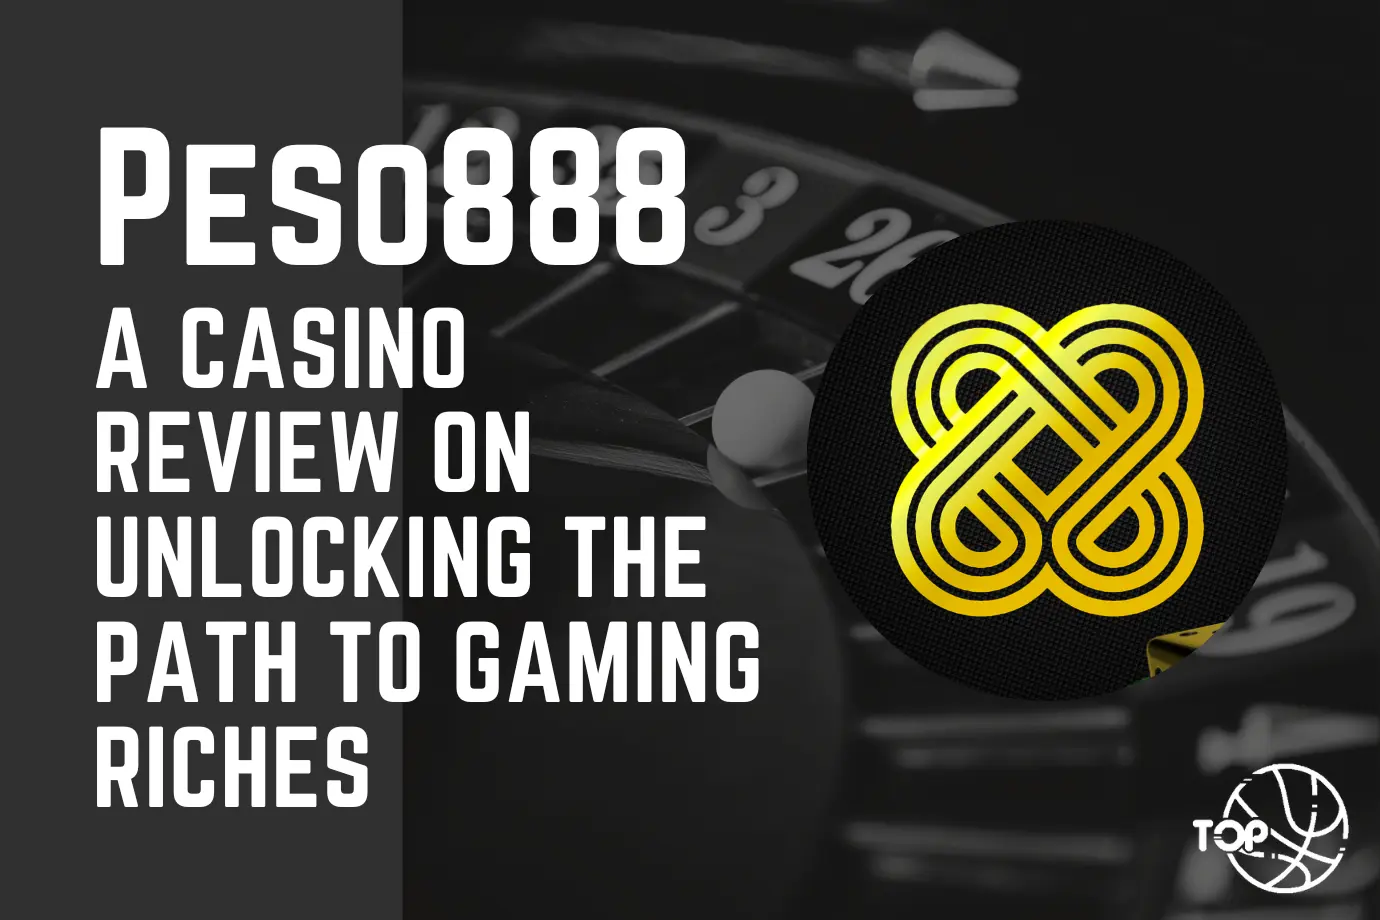 Peso888: A Casino Review to Unlocking the Path to Gaming Riches